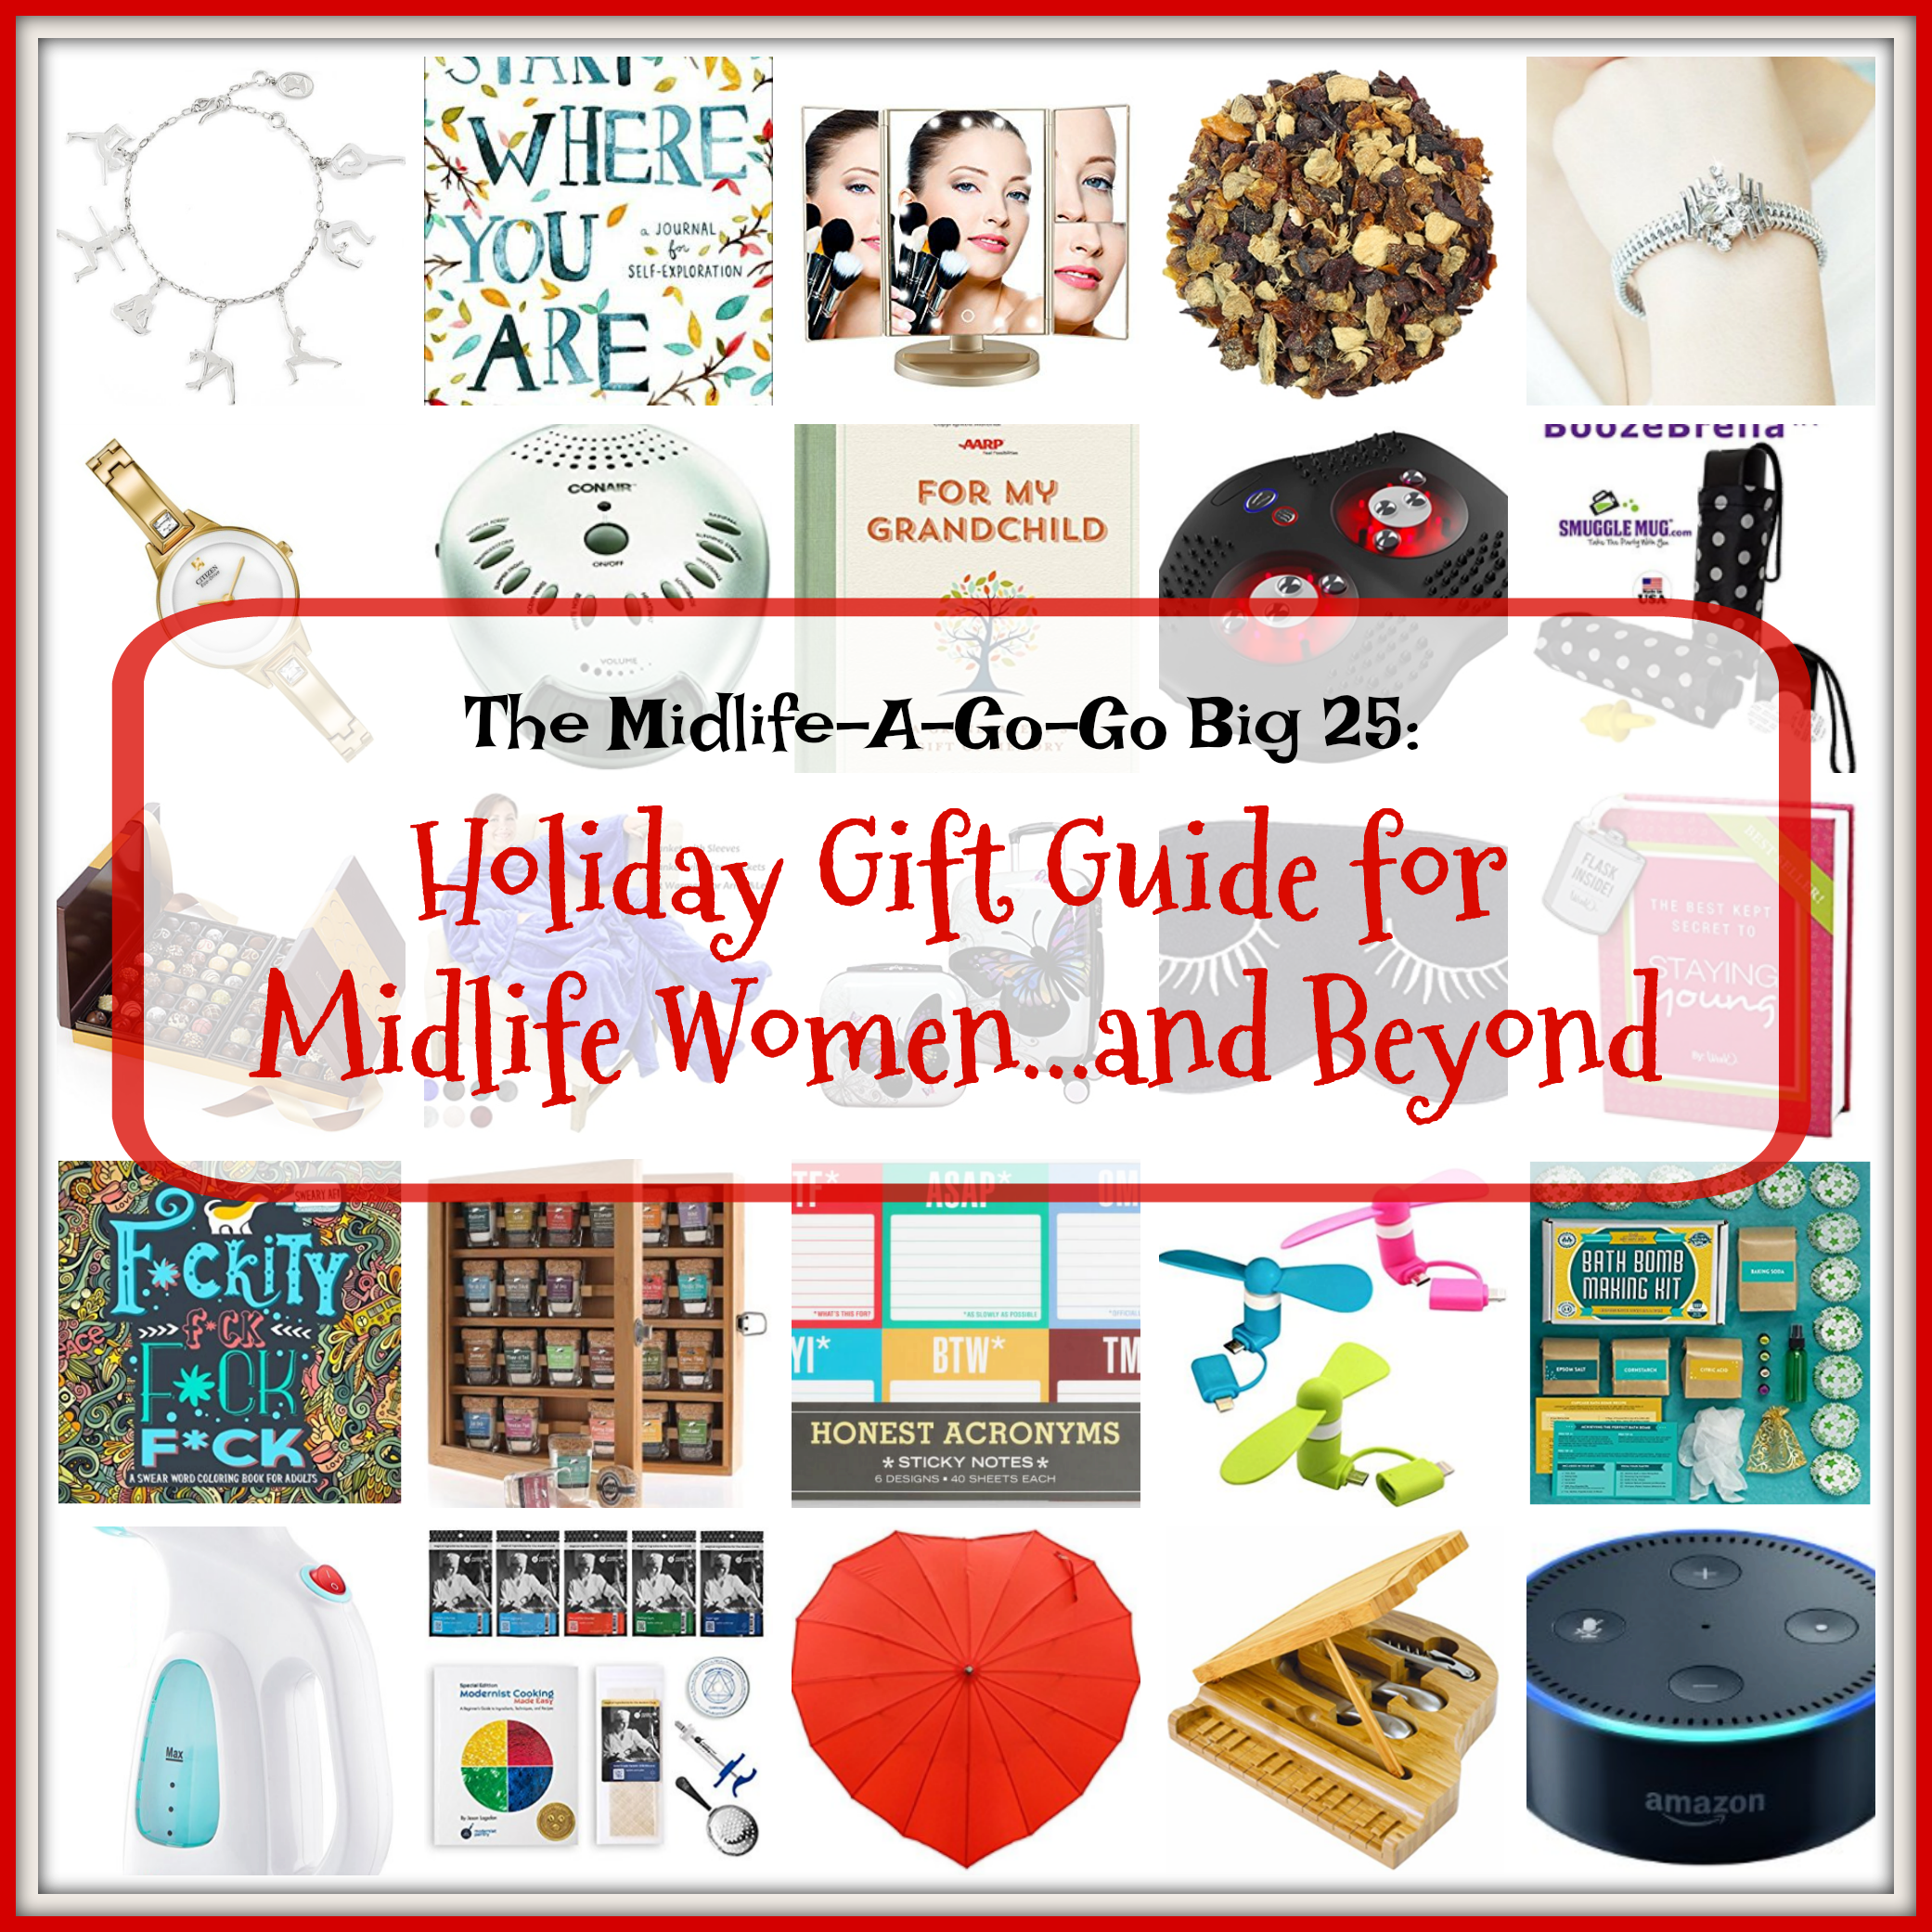 The BIG 25: Holiday Gift Guide for Midlife Women